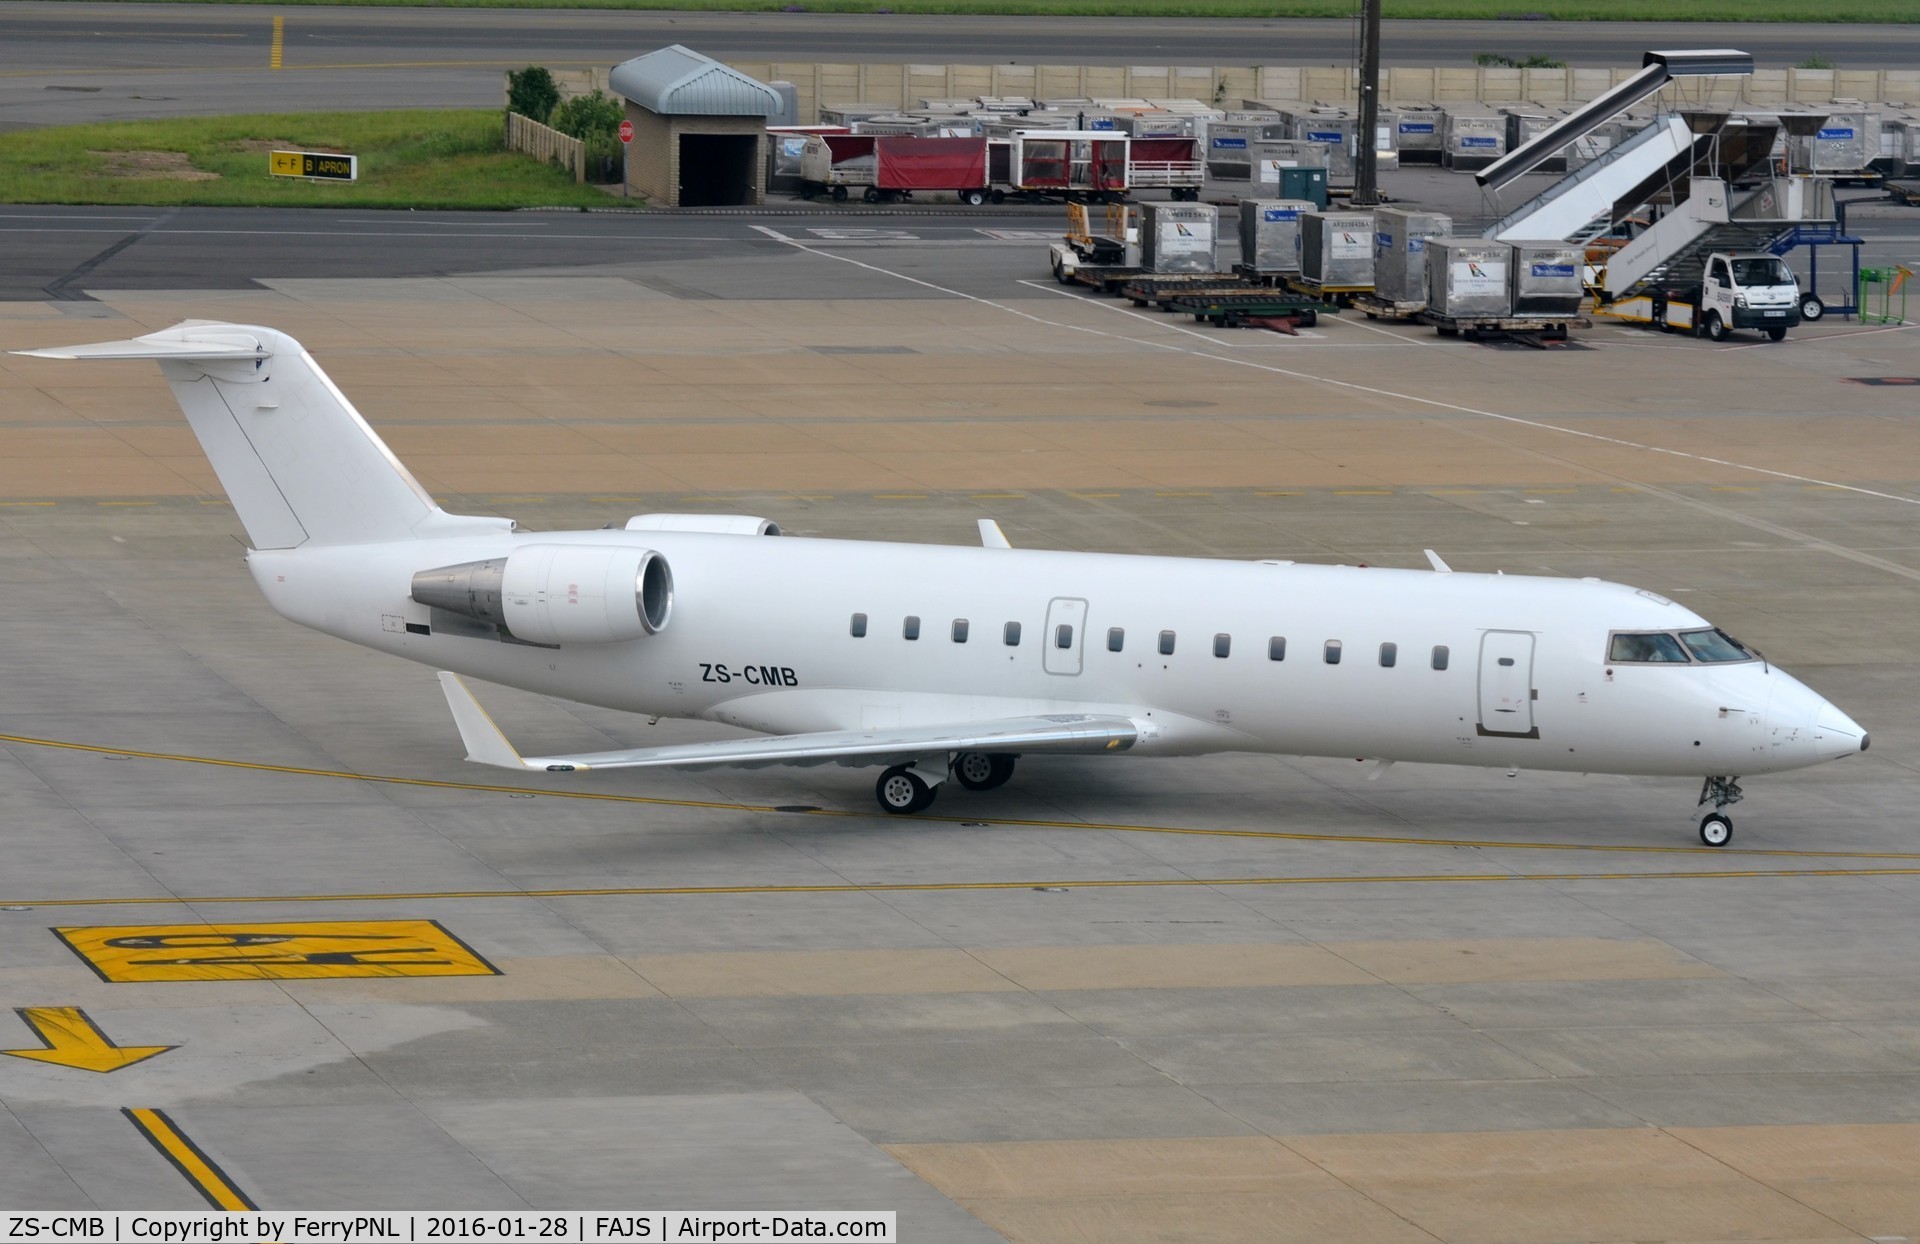 ZS-CMB, 1997 Canadair CRJ-100ER (CL-600-2B19) C/N 7217, Ex Comair N989CA now in typical South African white c/s